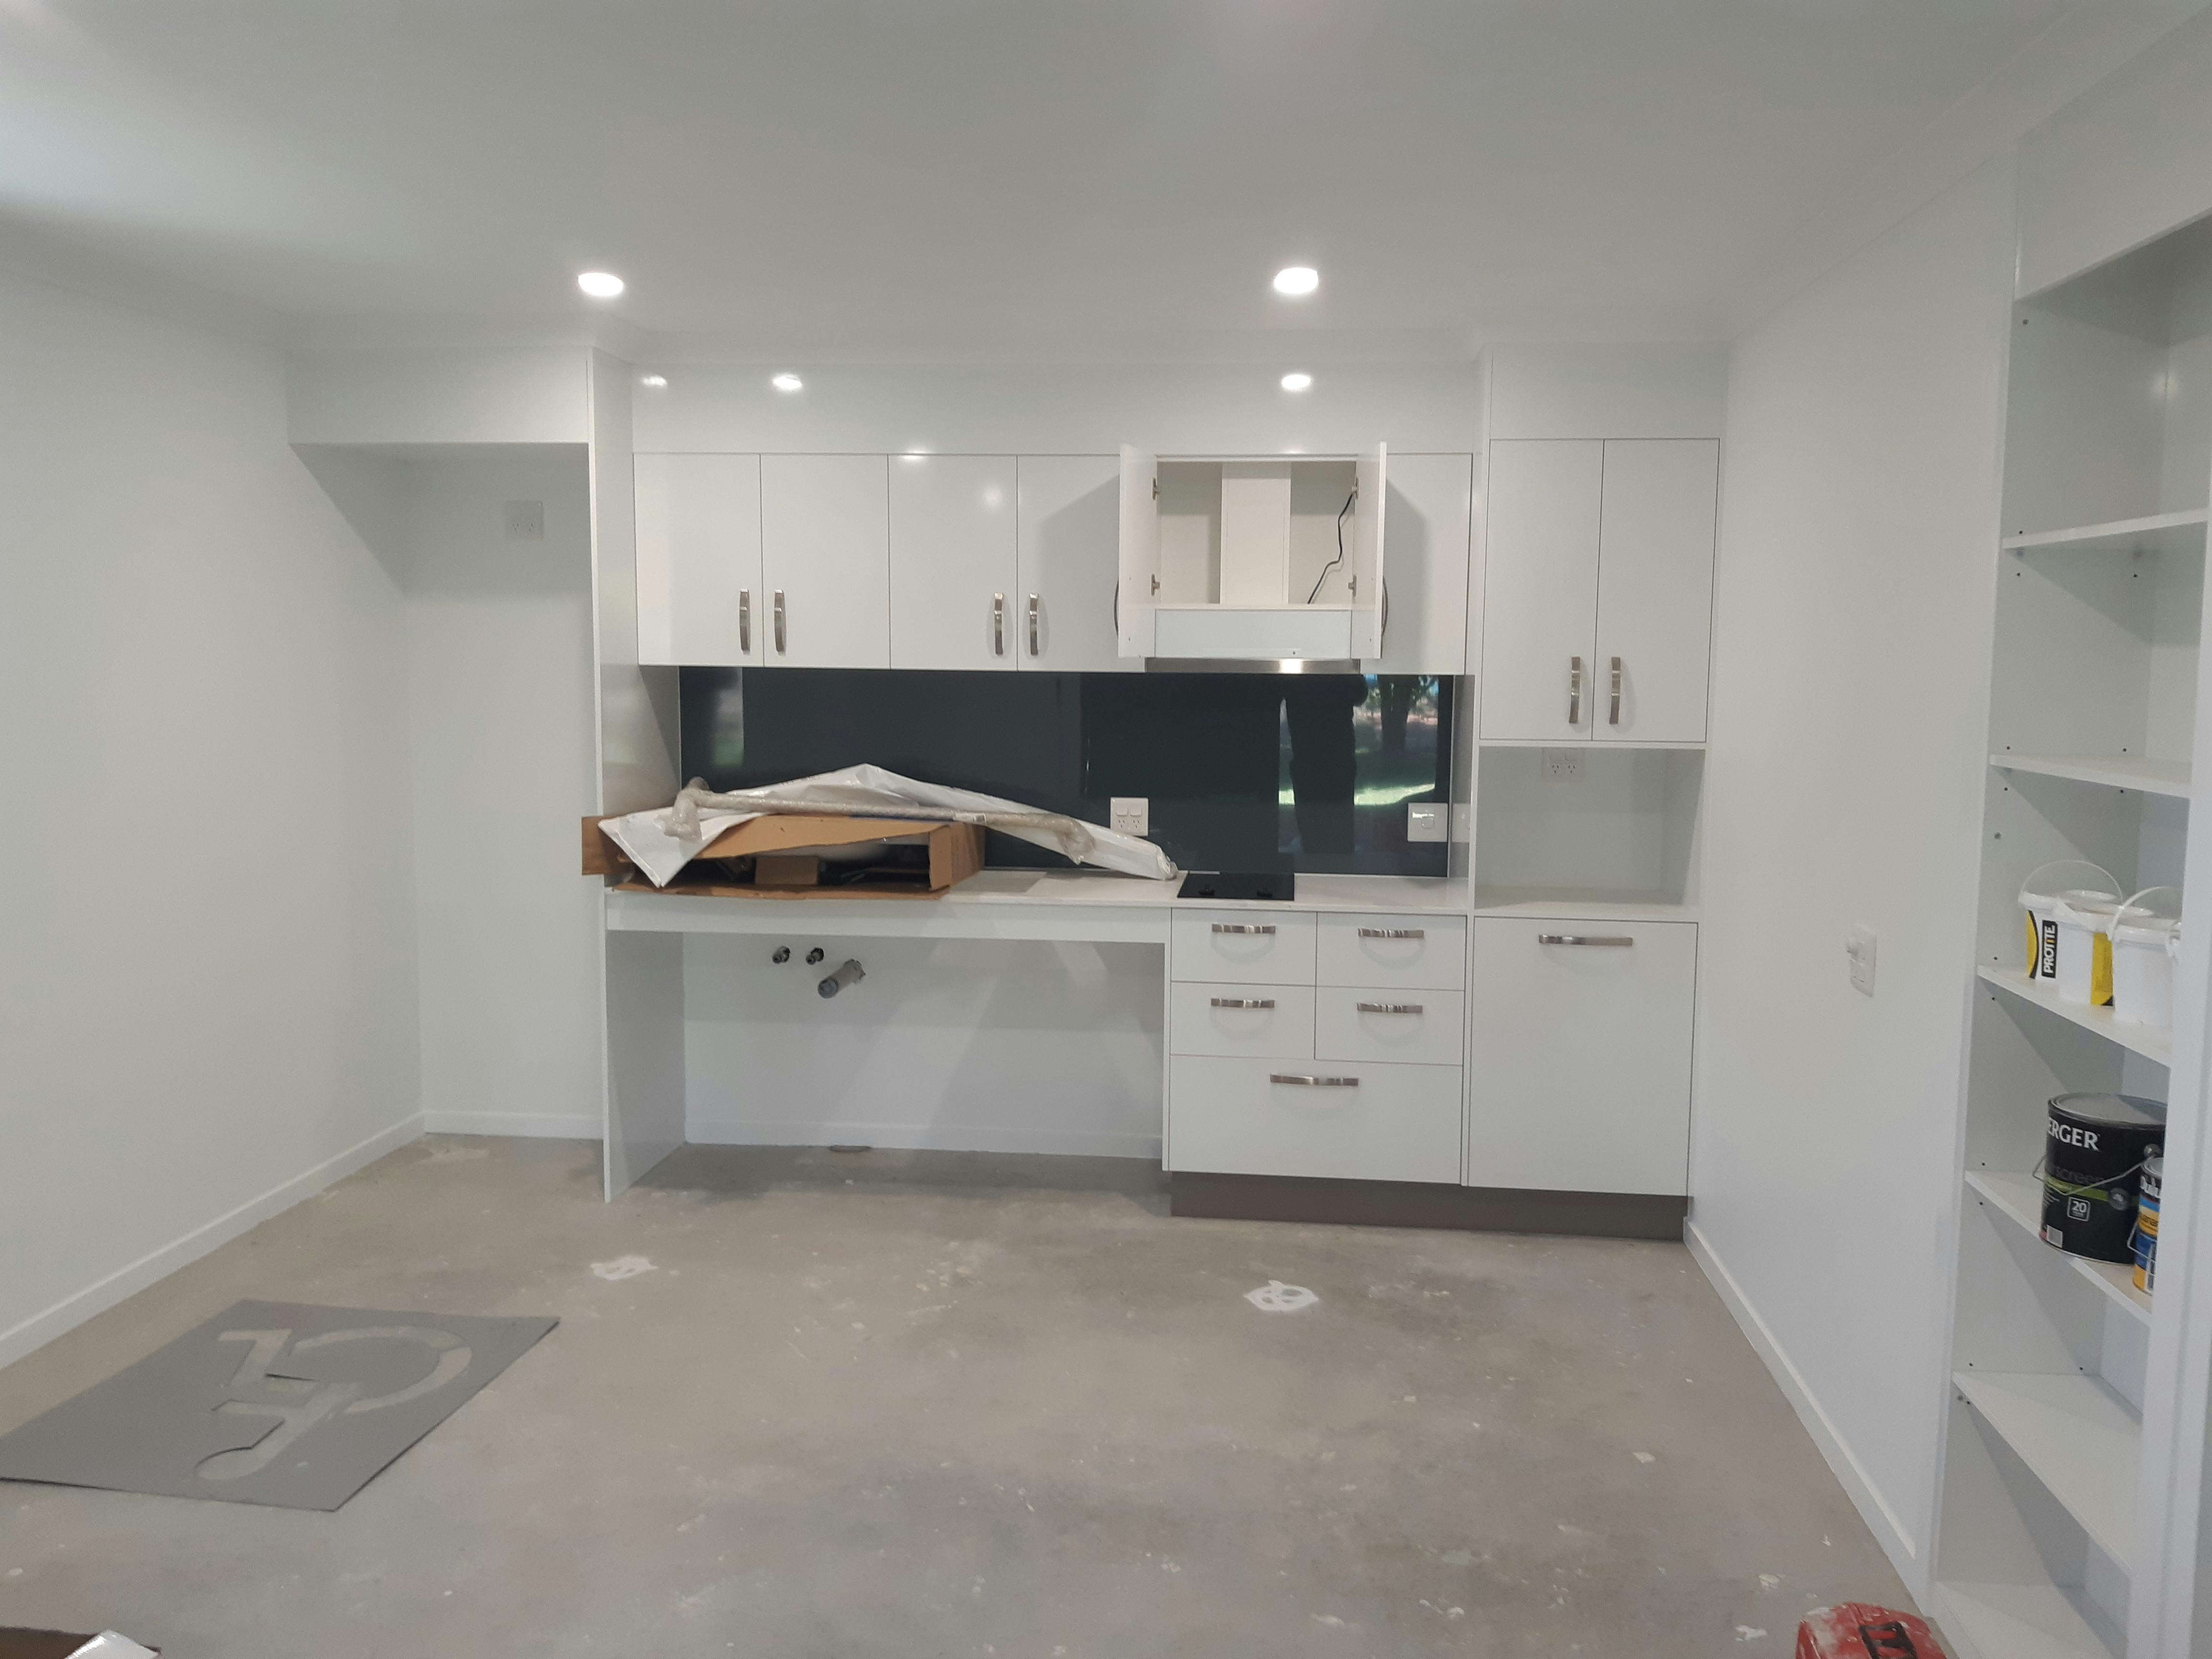 Family accessible cabin kitchen taking shape 14 April 2021